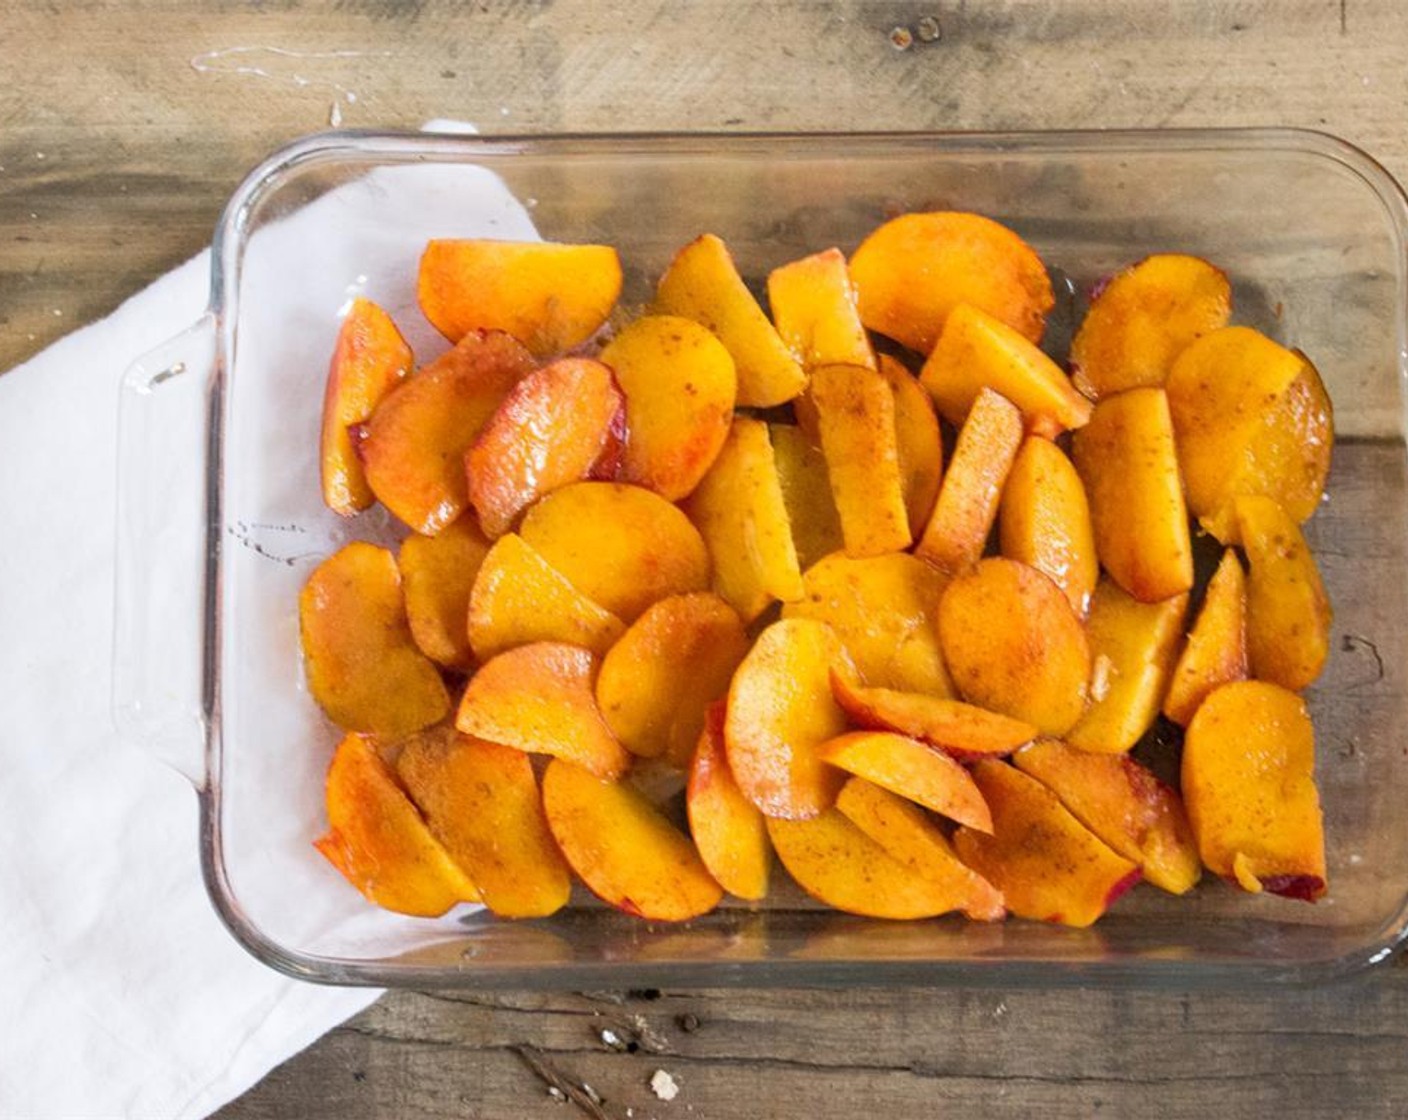 step 5 Sprinkle peaches with Ground Cinnamon (to taste) and cook at 400 degrees F (200 degrees C) for 30-35 minutes.